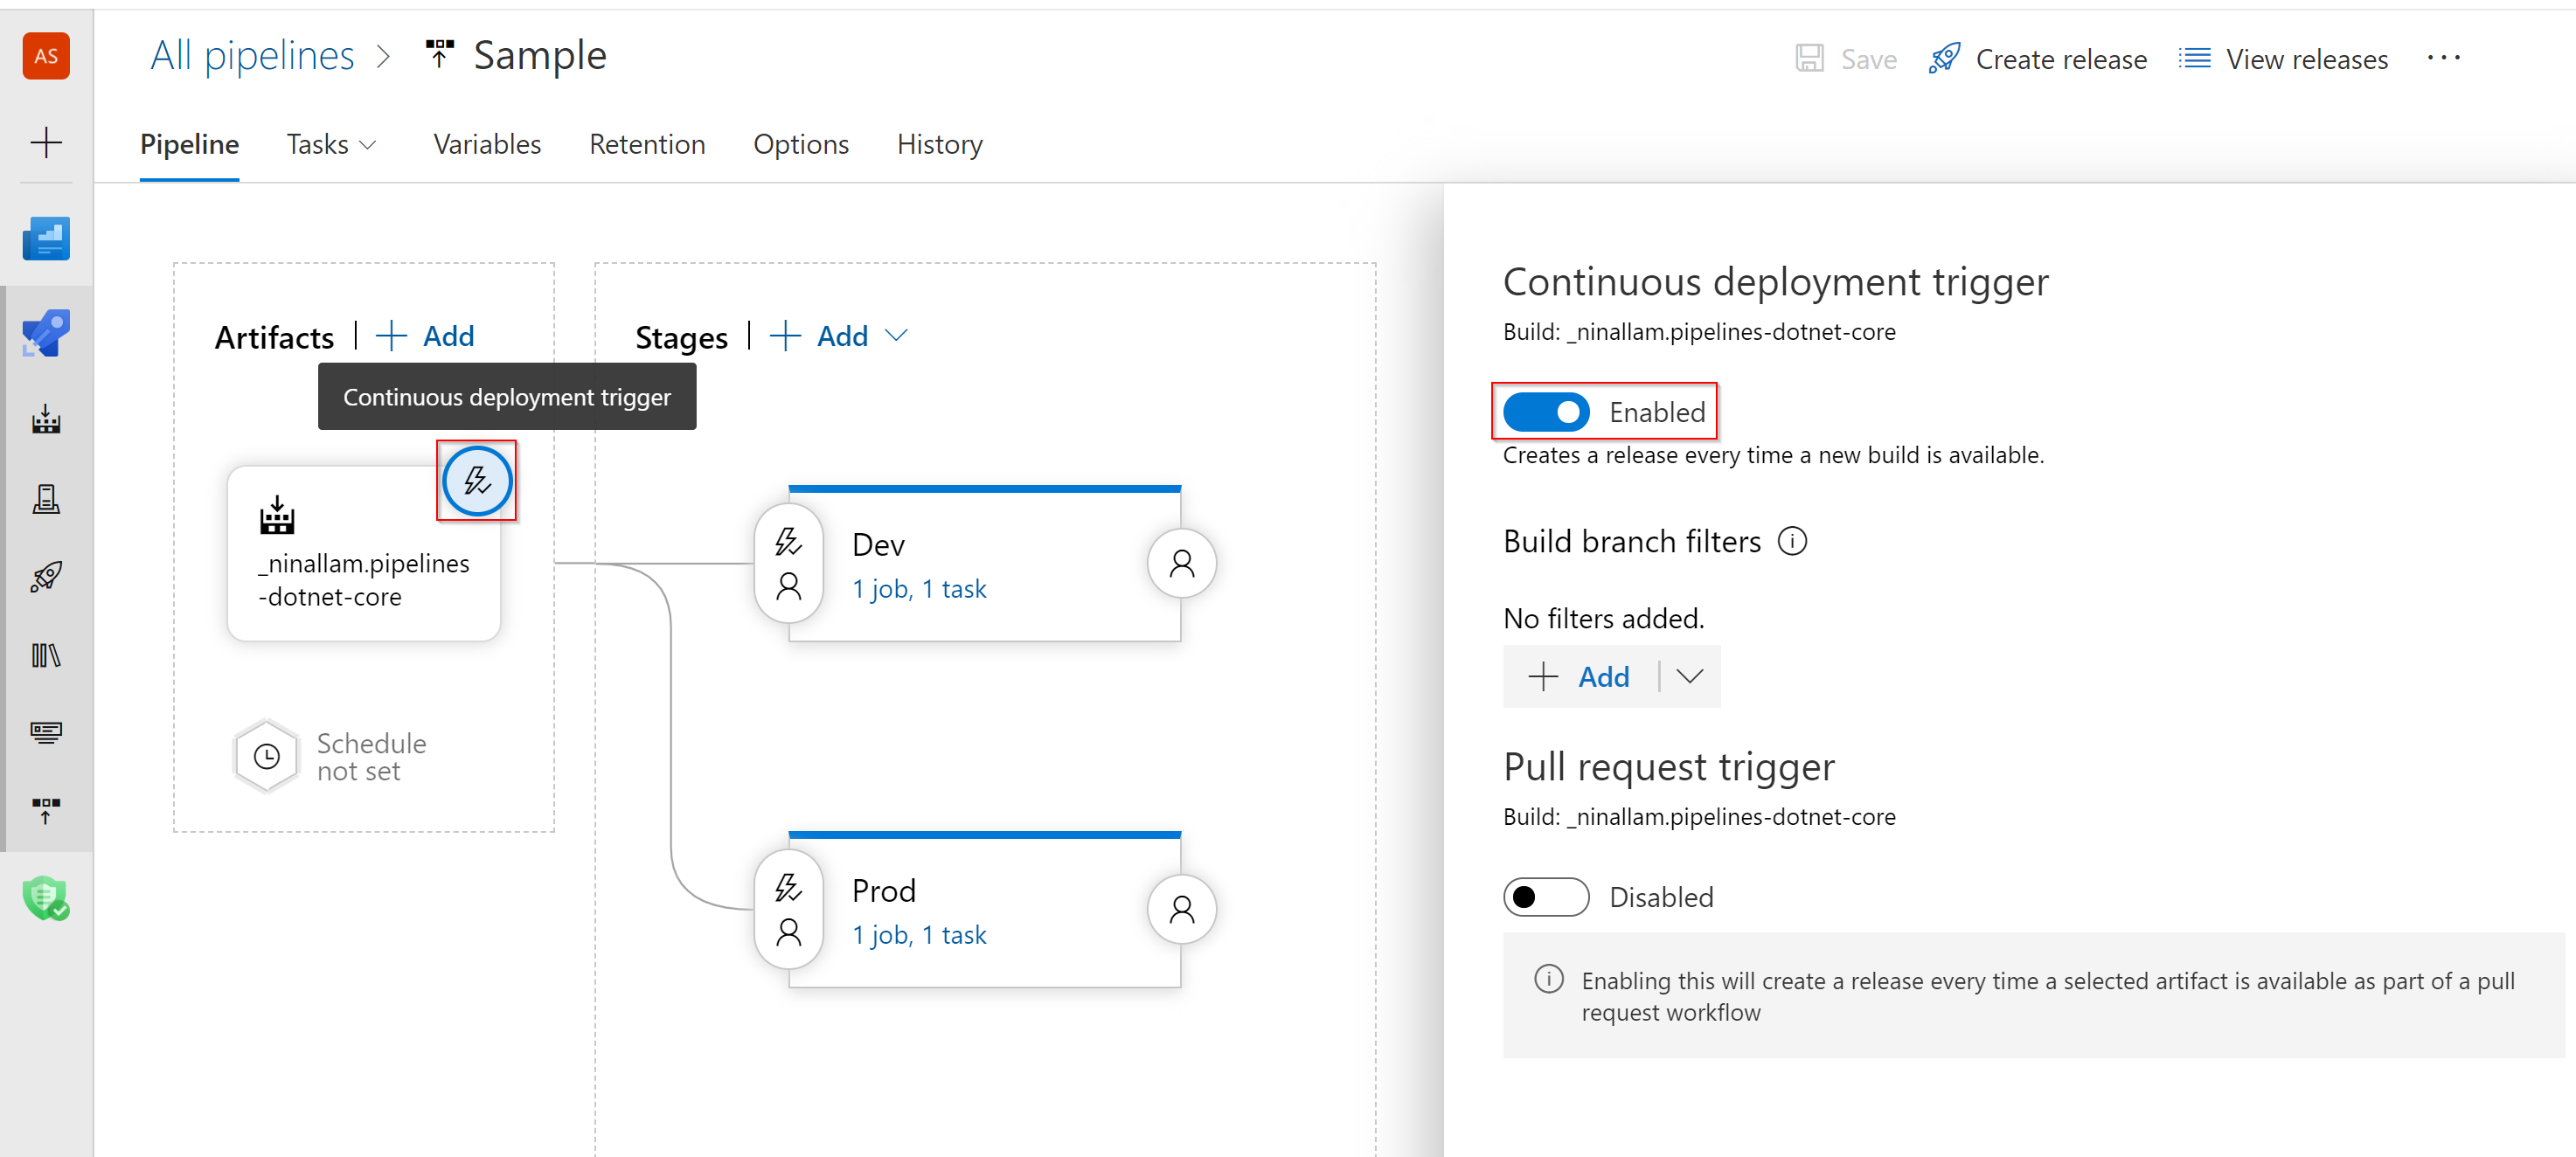 Enable continuous deployment trigger